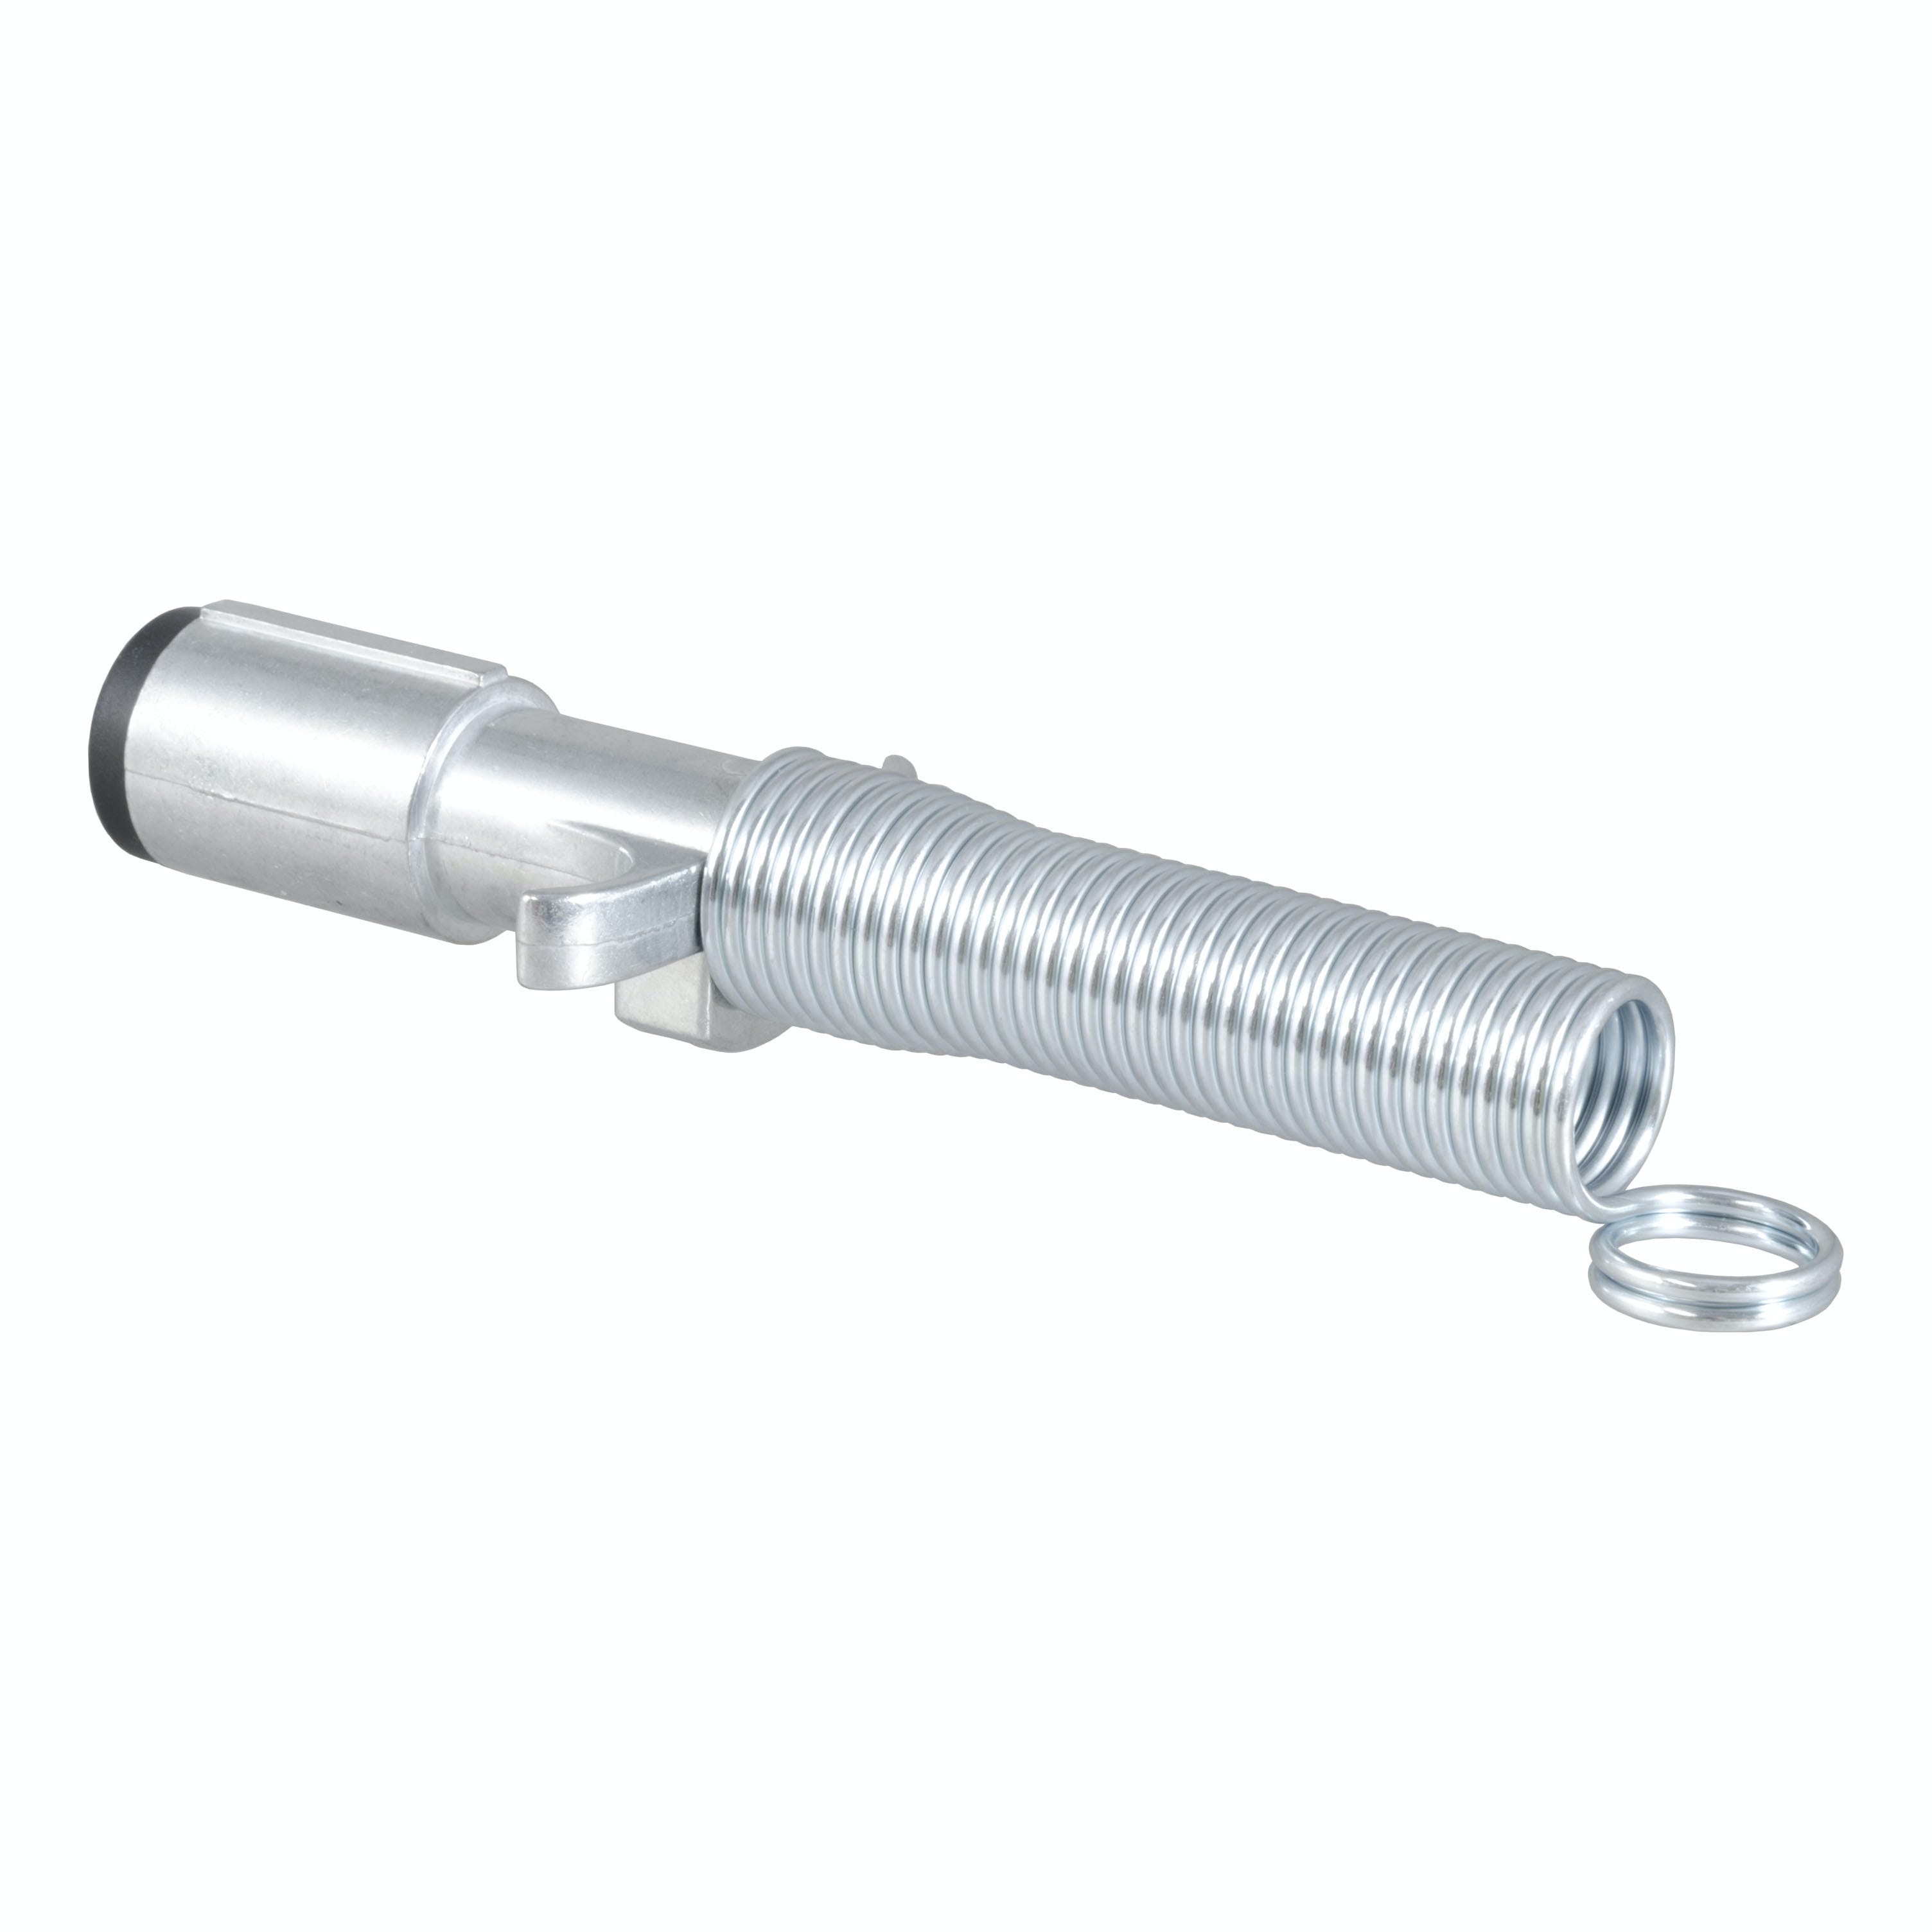 CURT 58083 6-Way Round Connector Plug with Spring (Trailer Side, Packaged)